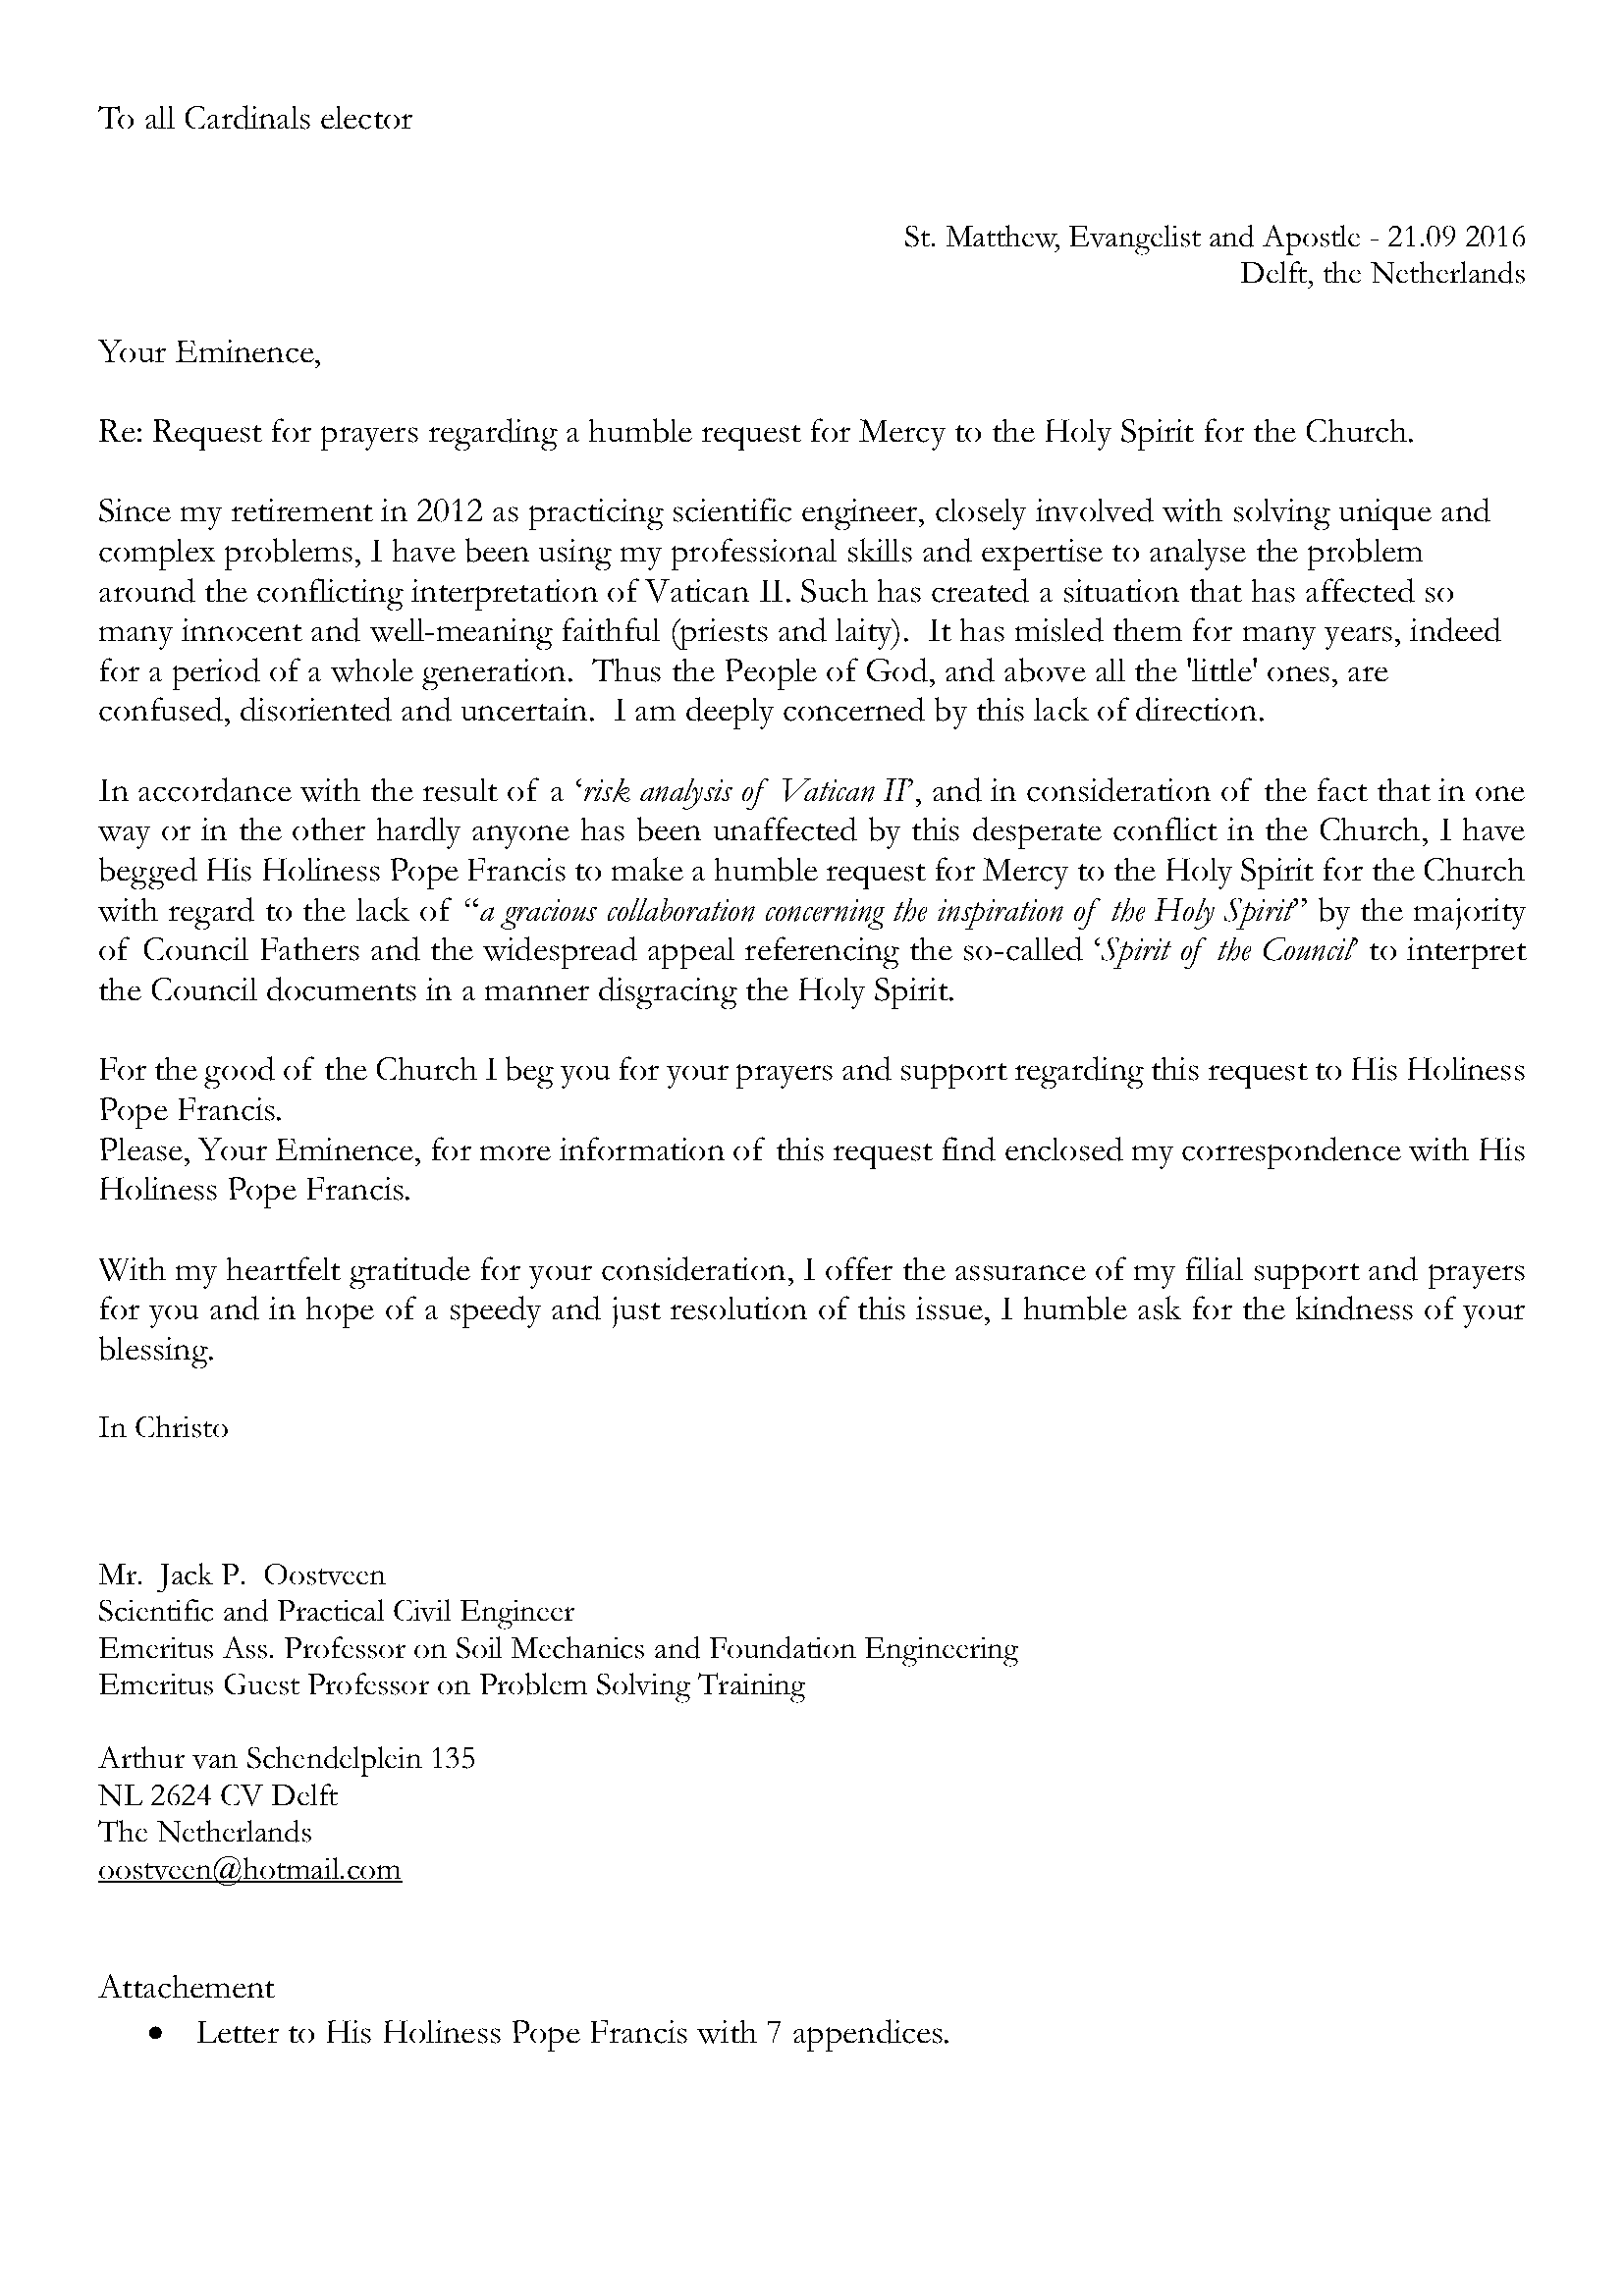 letter to Cardinals